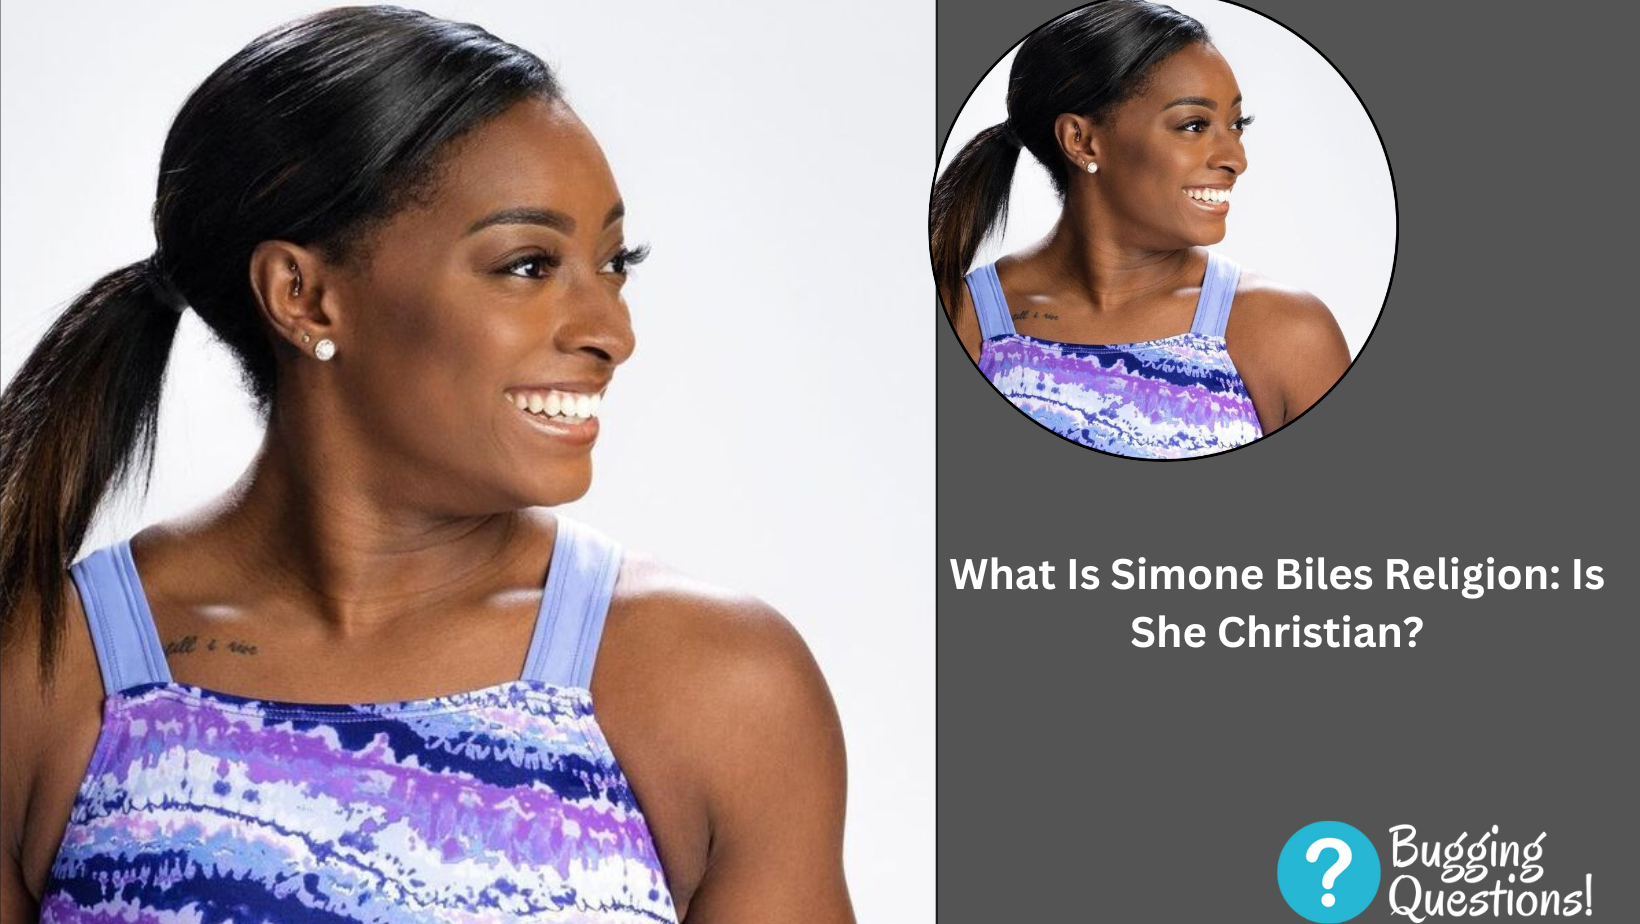 What Is Simone Biles Religion: Is She Christian?